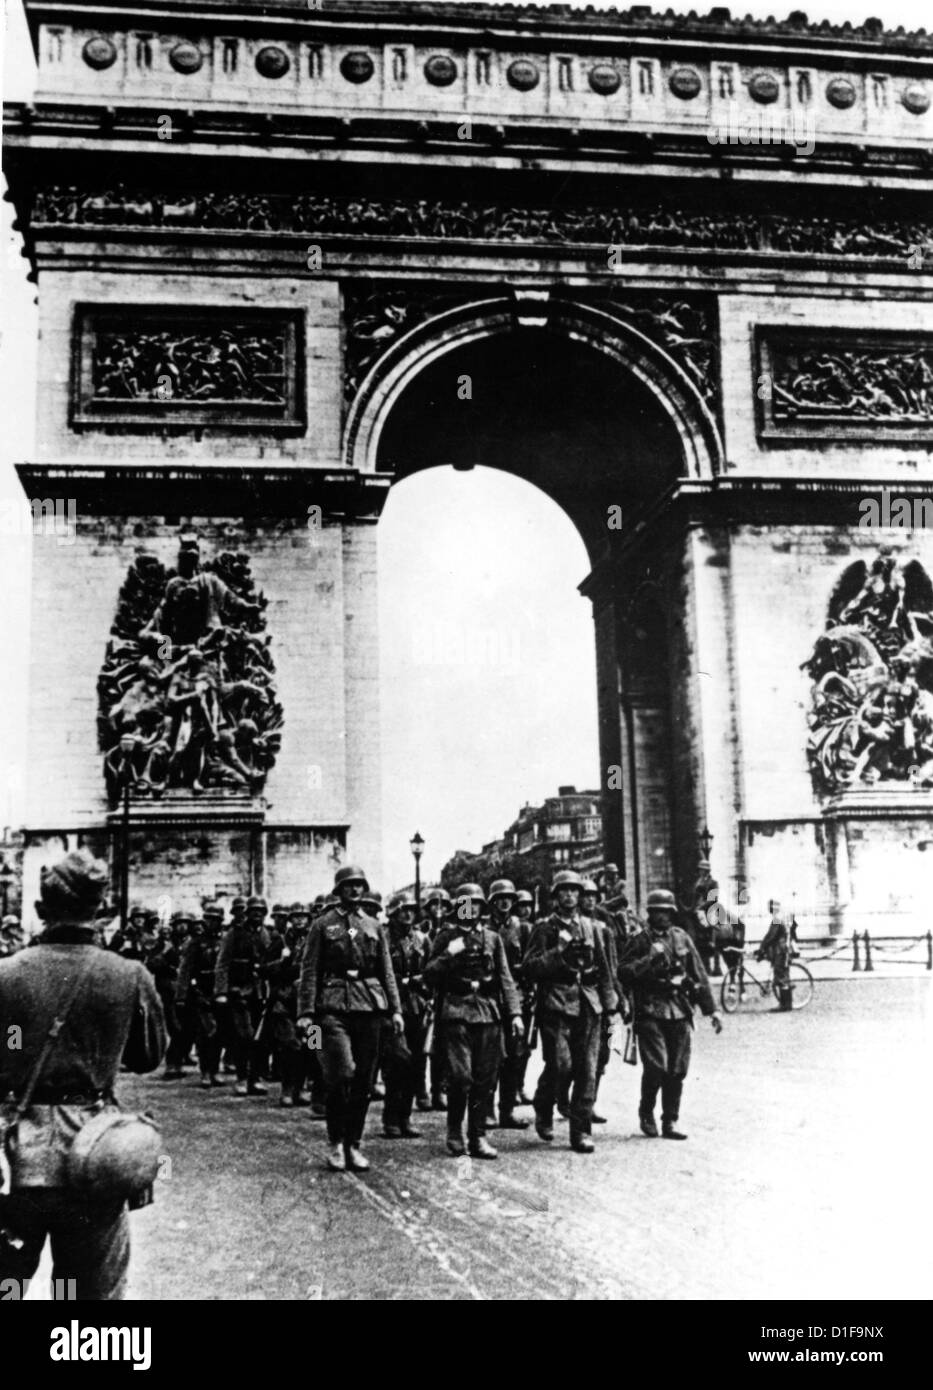 German troops march along the Champs Elysees and Arc de Triomphe in